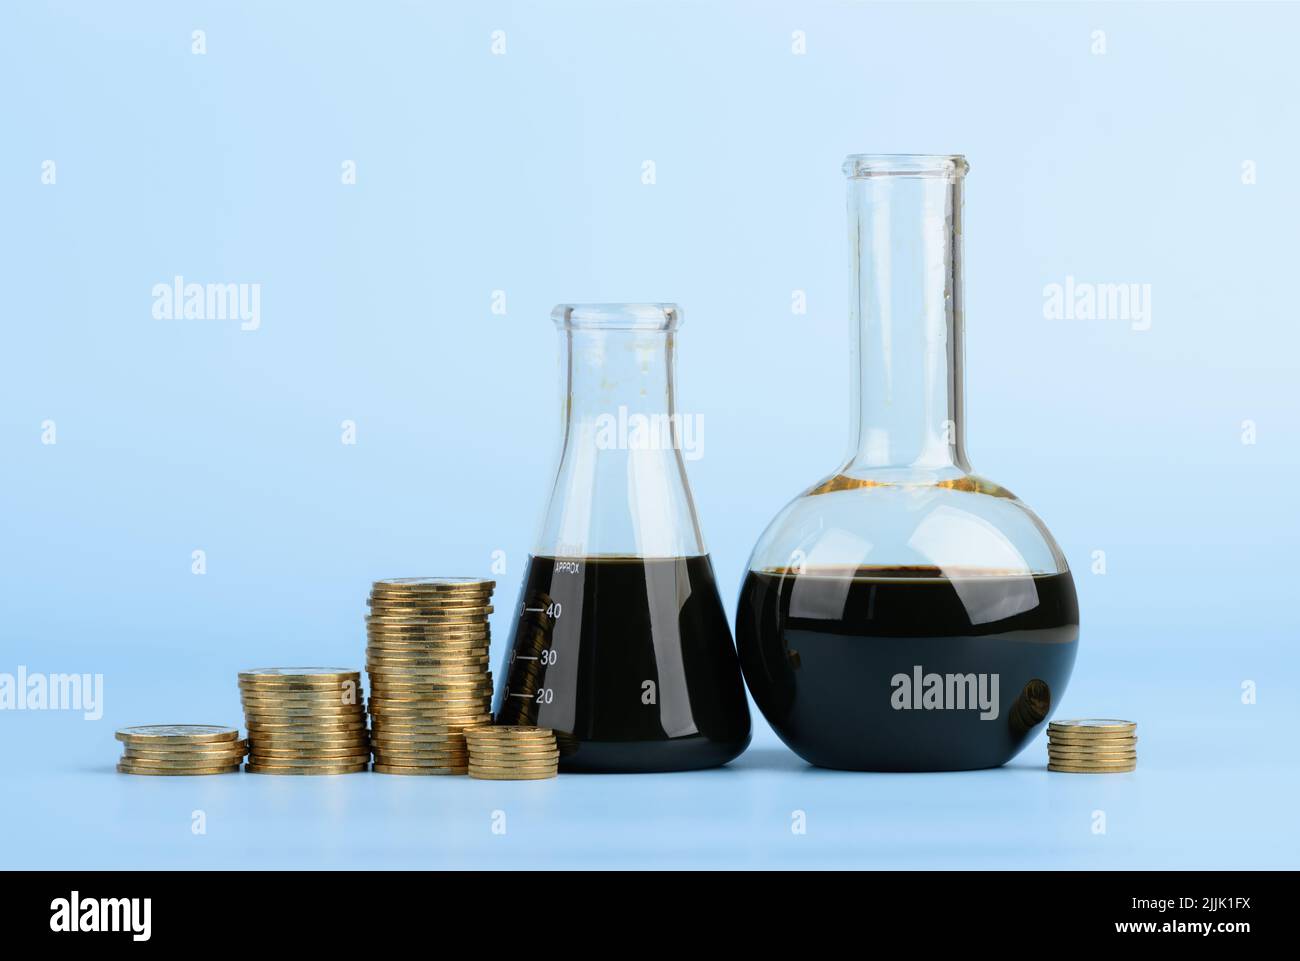 Crude oil in glass beakers with coins stacks on blue background, fuel price concept Stock Photo